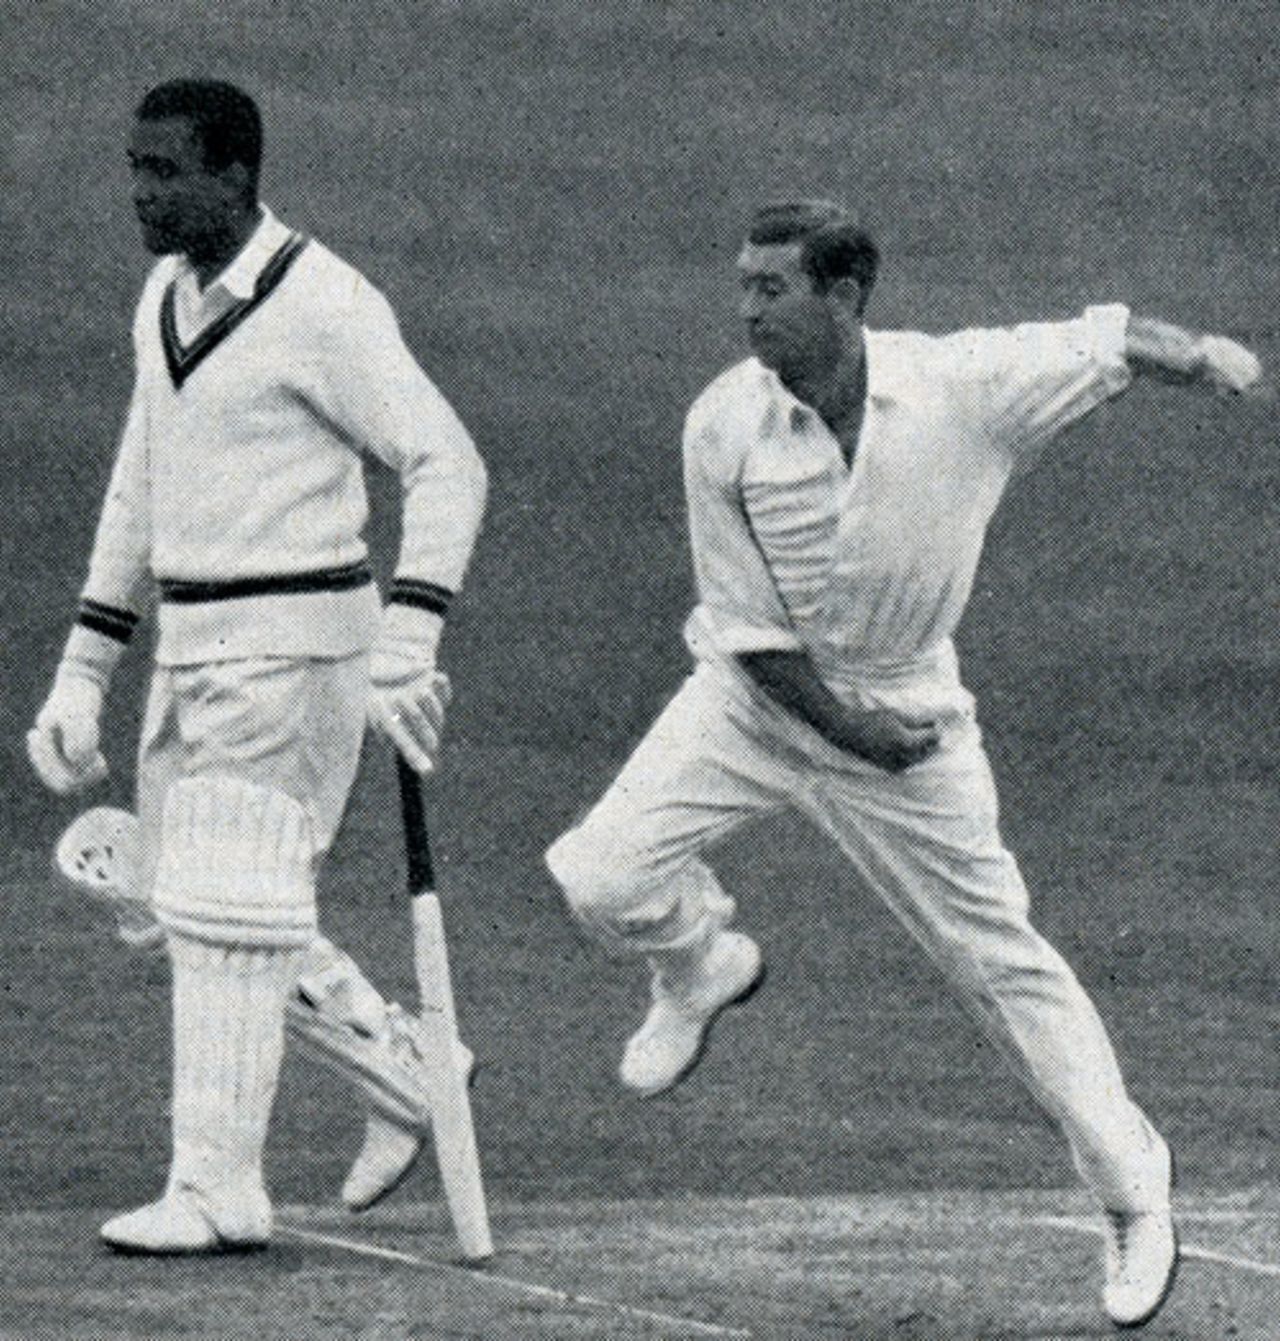 Derek Shackleton bowls on his Test recall after almost 12 years out of the side, England v West Indies, Lord's, June 22, 1963